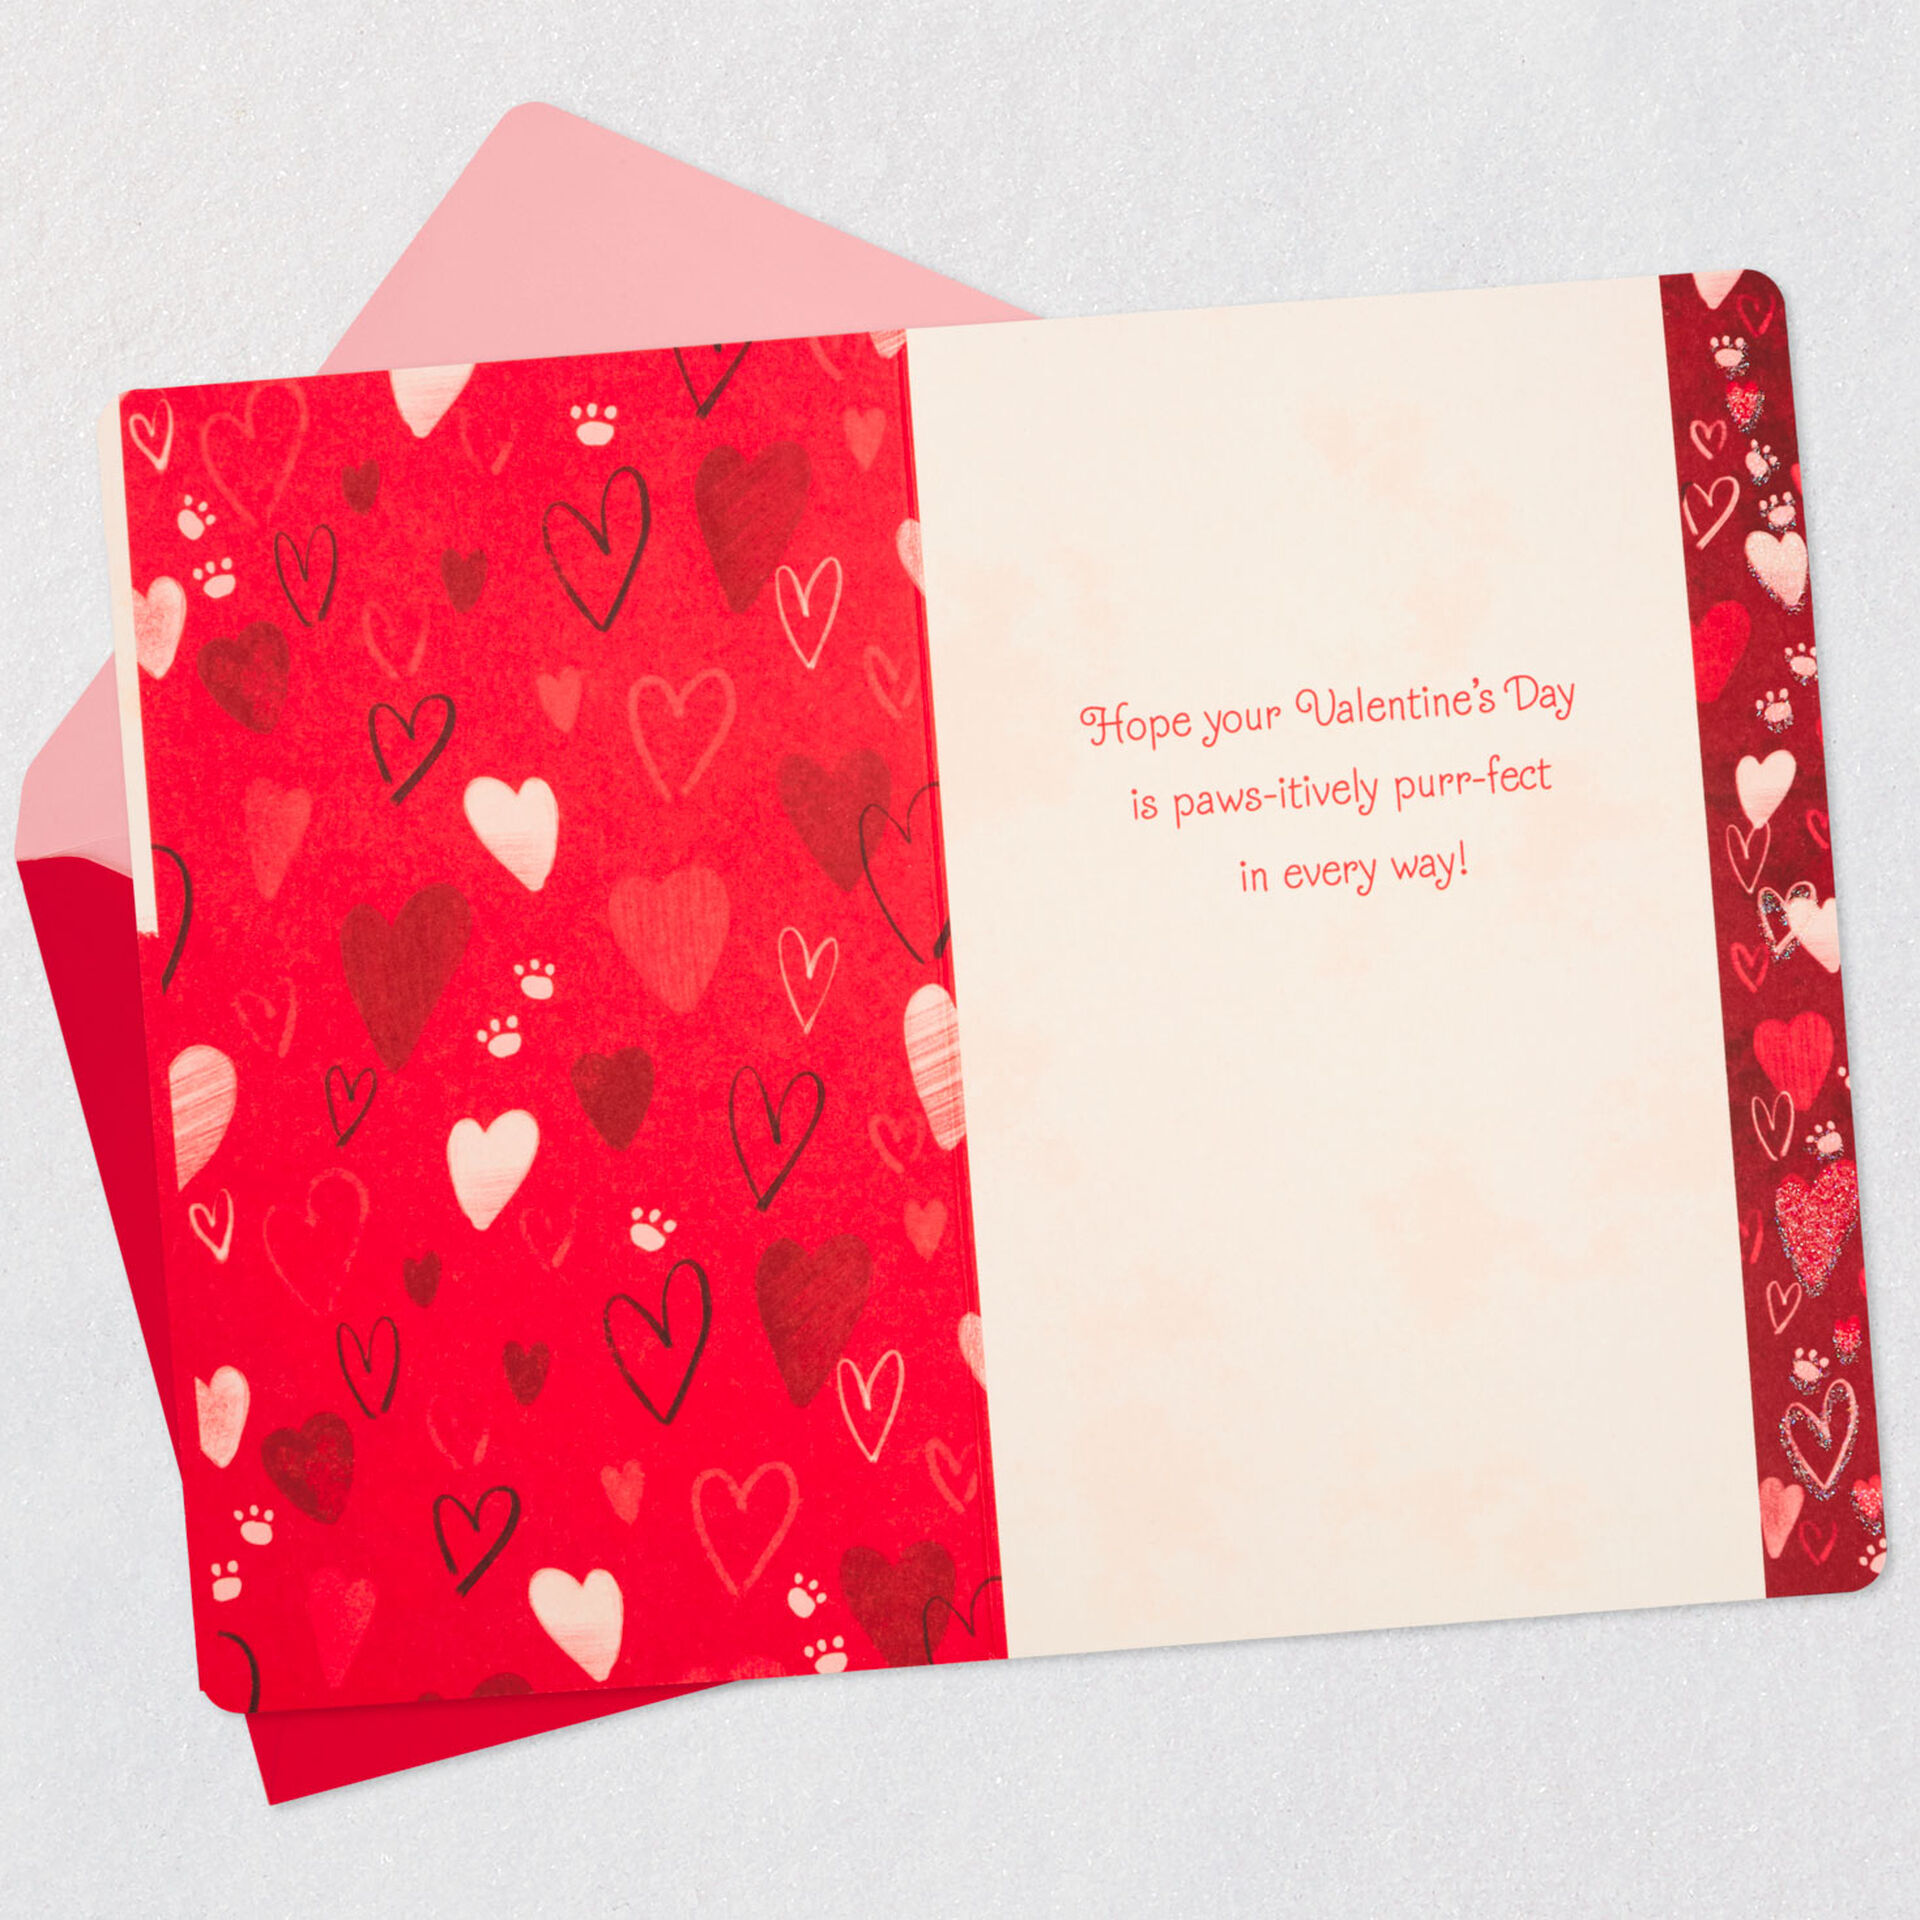 Kitten-and-Yarn-Valentines-Day-Card-From-the-Cat_299VEE8773_03